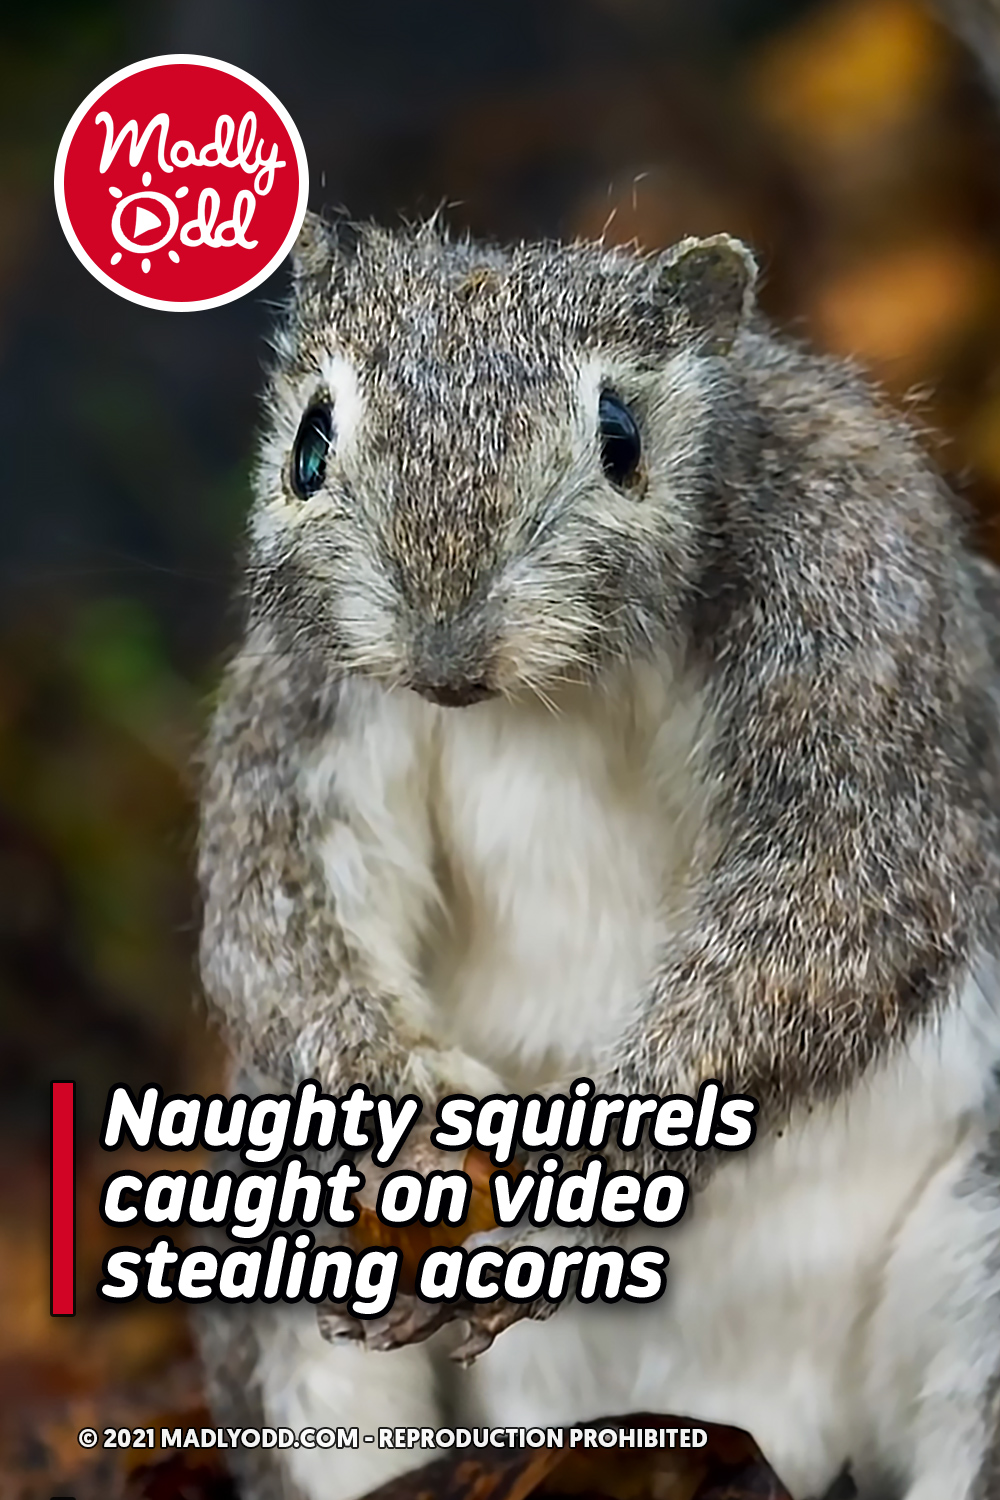 Naughty squirrels caught on video stealing acorns